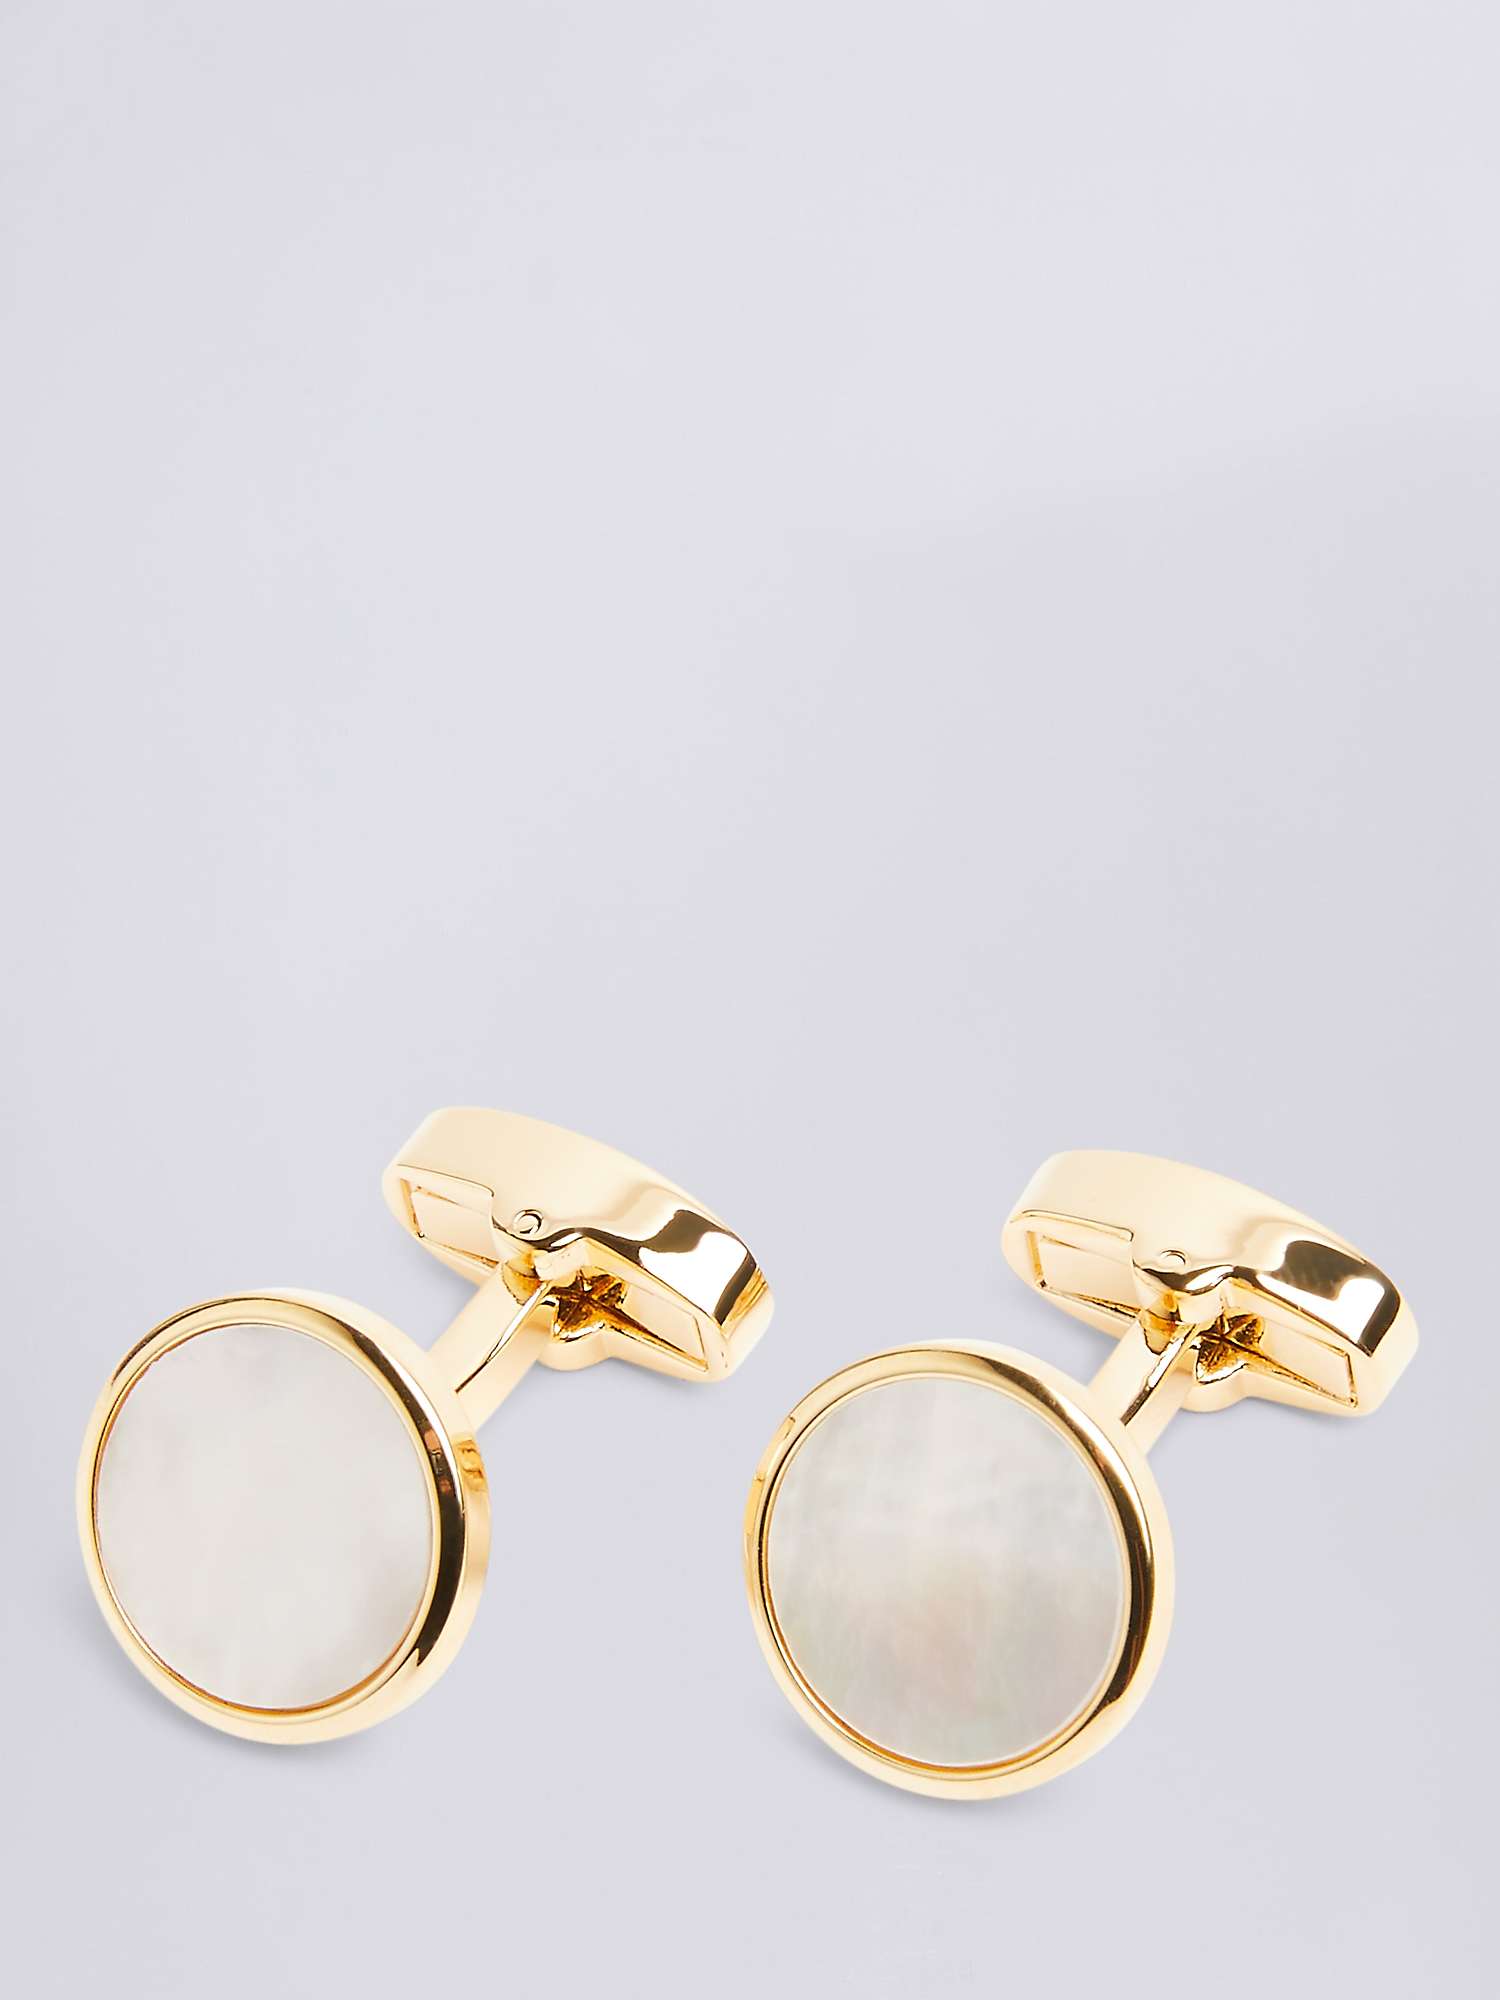 Buy Moss Bros. Mother of Pearl Cufflinks Online at johnlewis.com